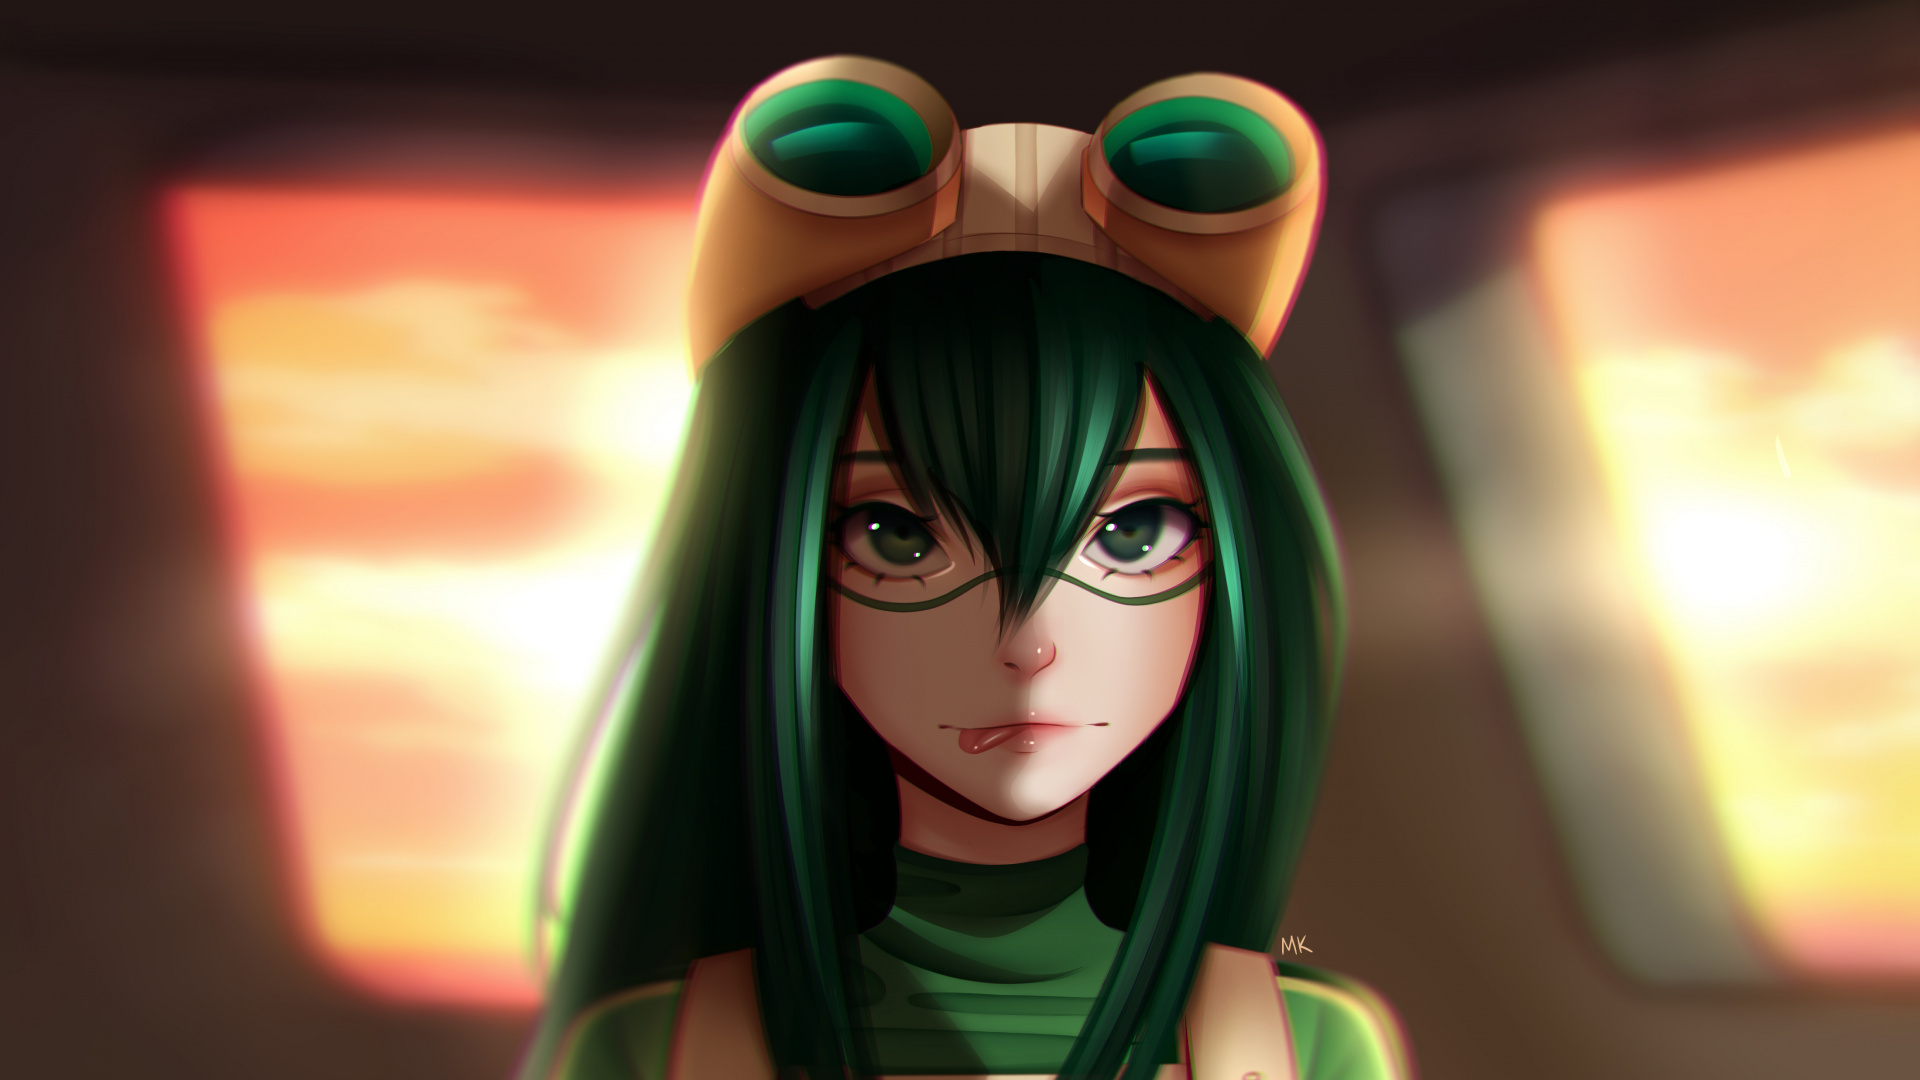 Green Haired Female Anime Character. Wallpaper in 1920x1080 Resolution